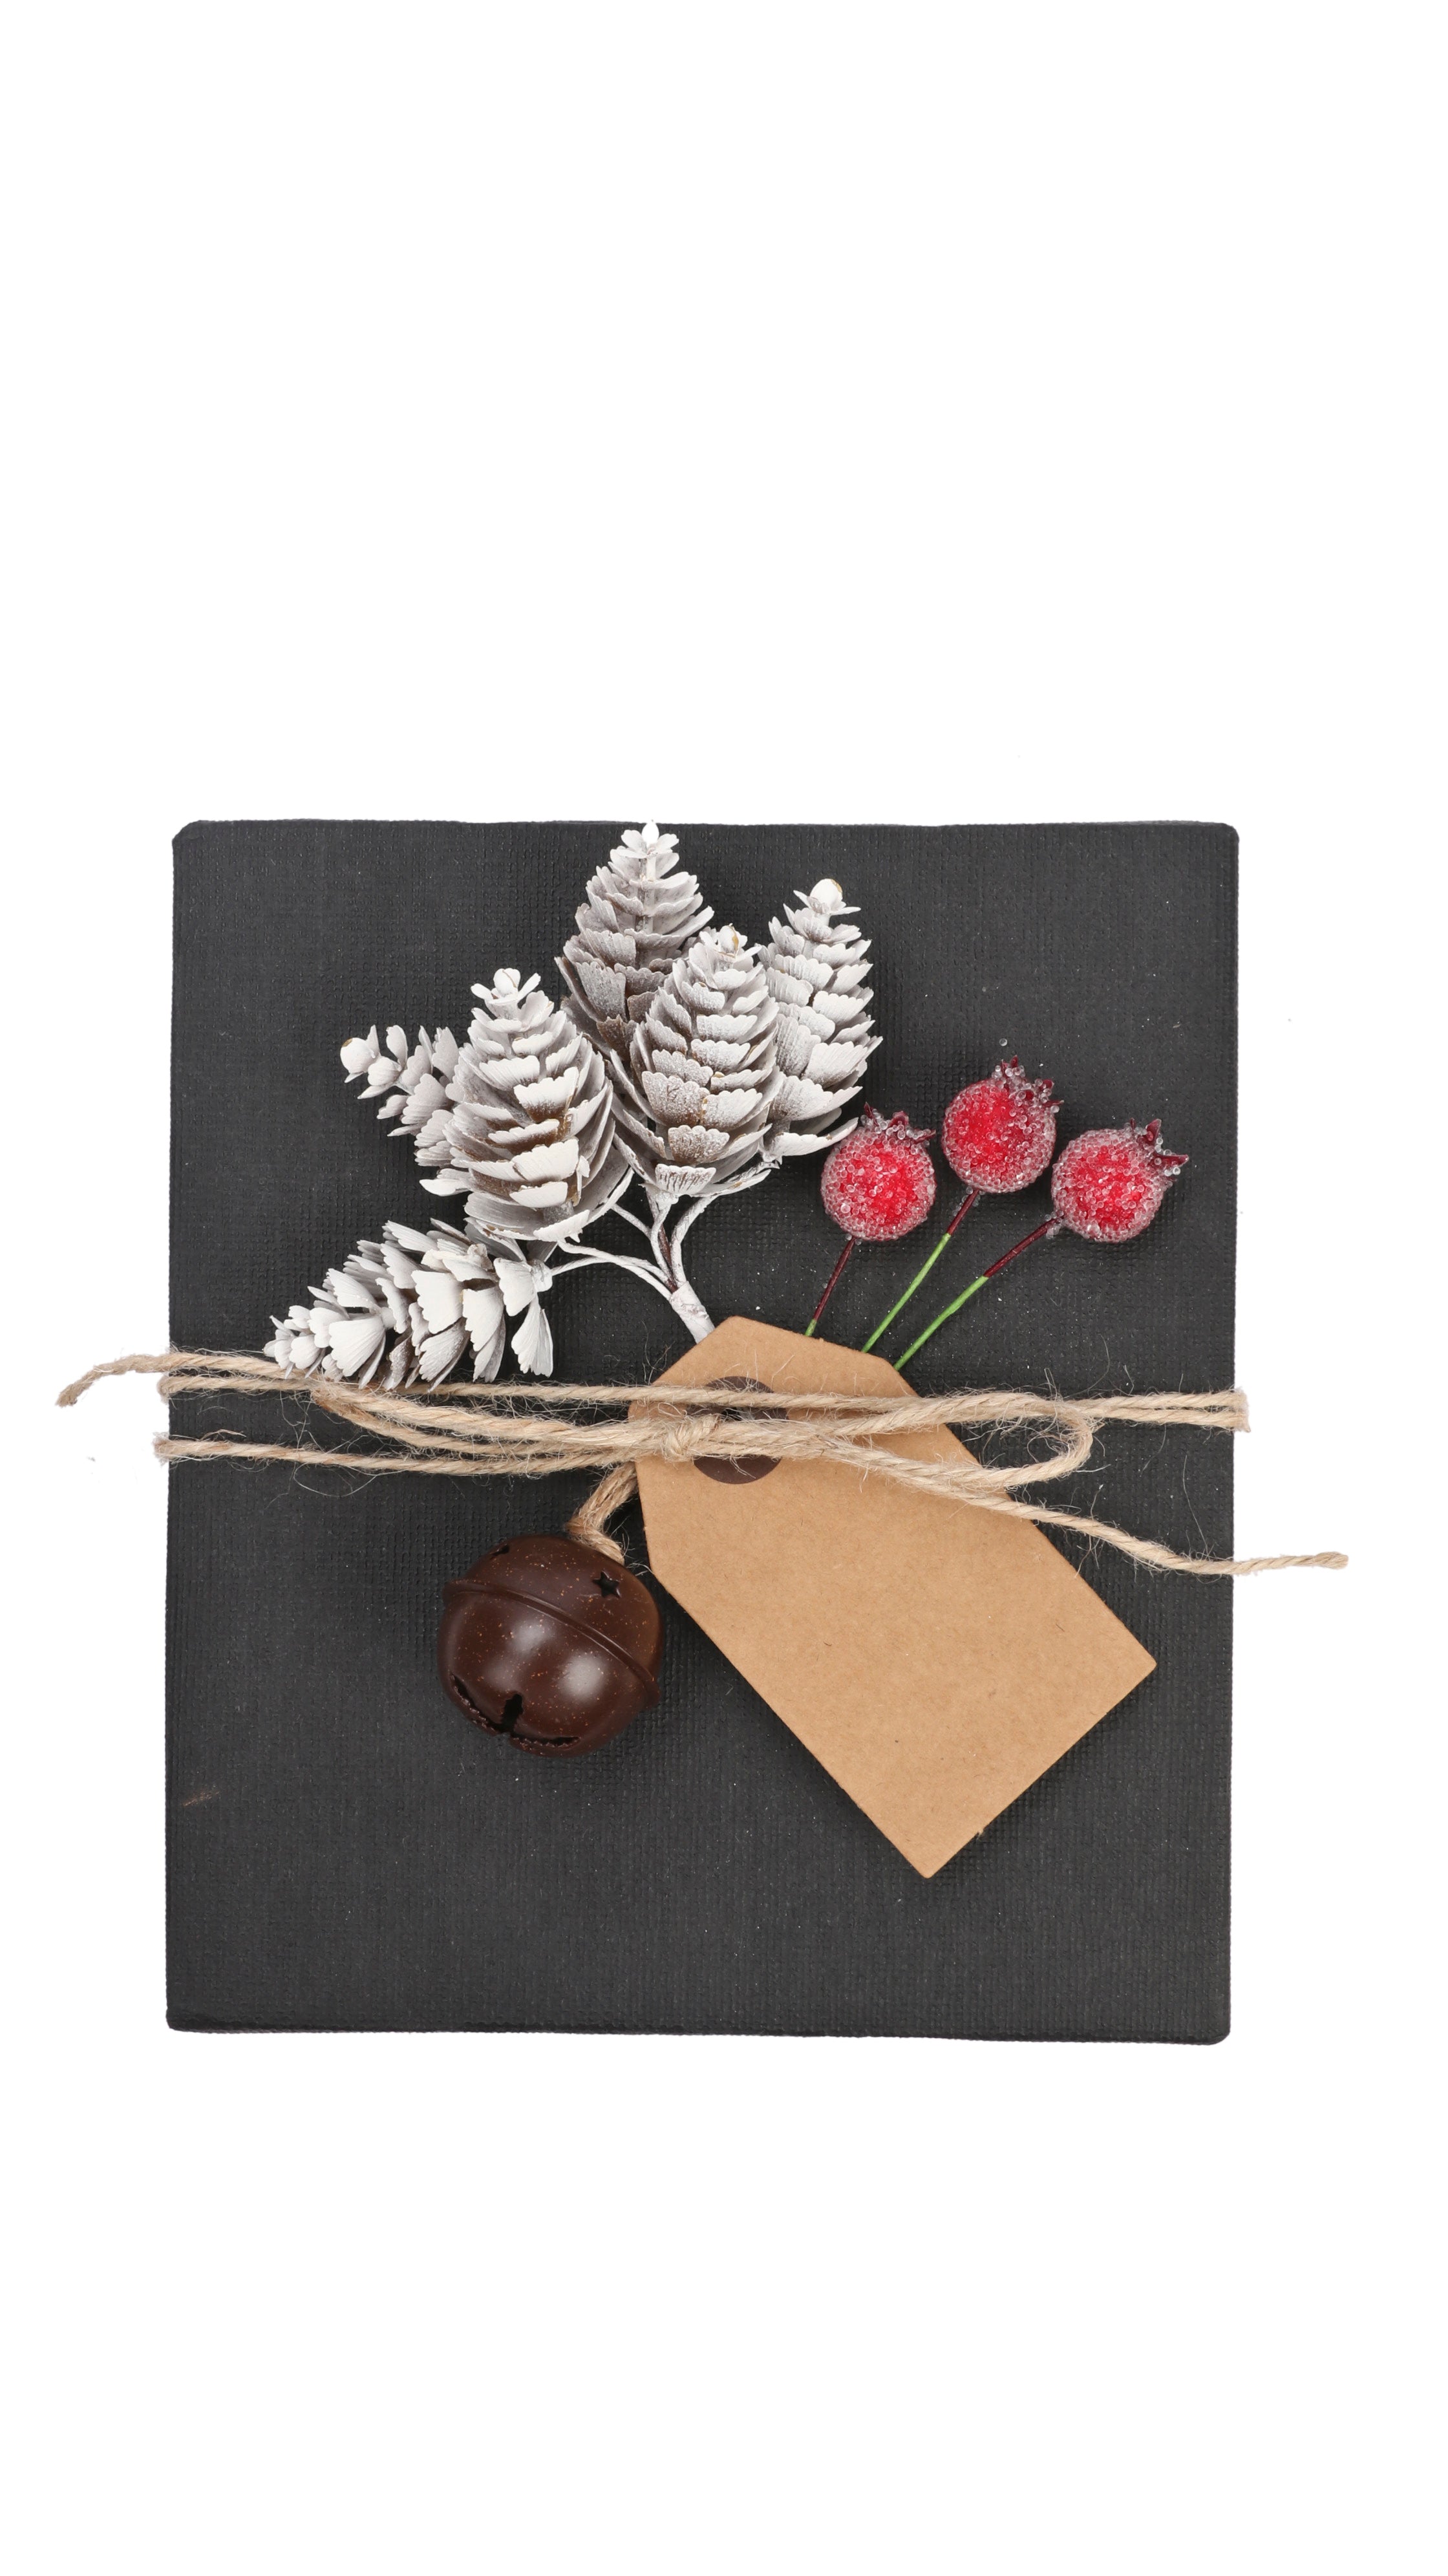 9Pcs/Set Gift Wrapping Collection - Artificial Pine Cone, Red Berry, Gift Tags, Bells